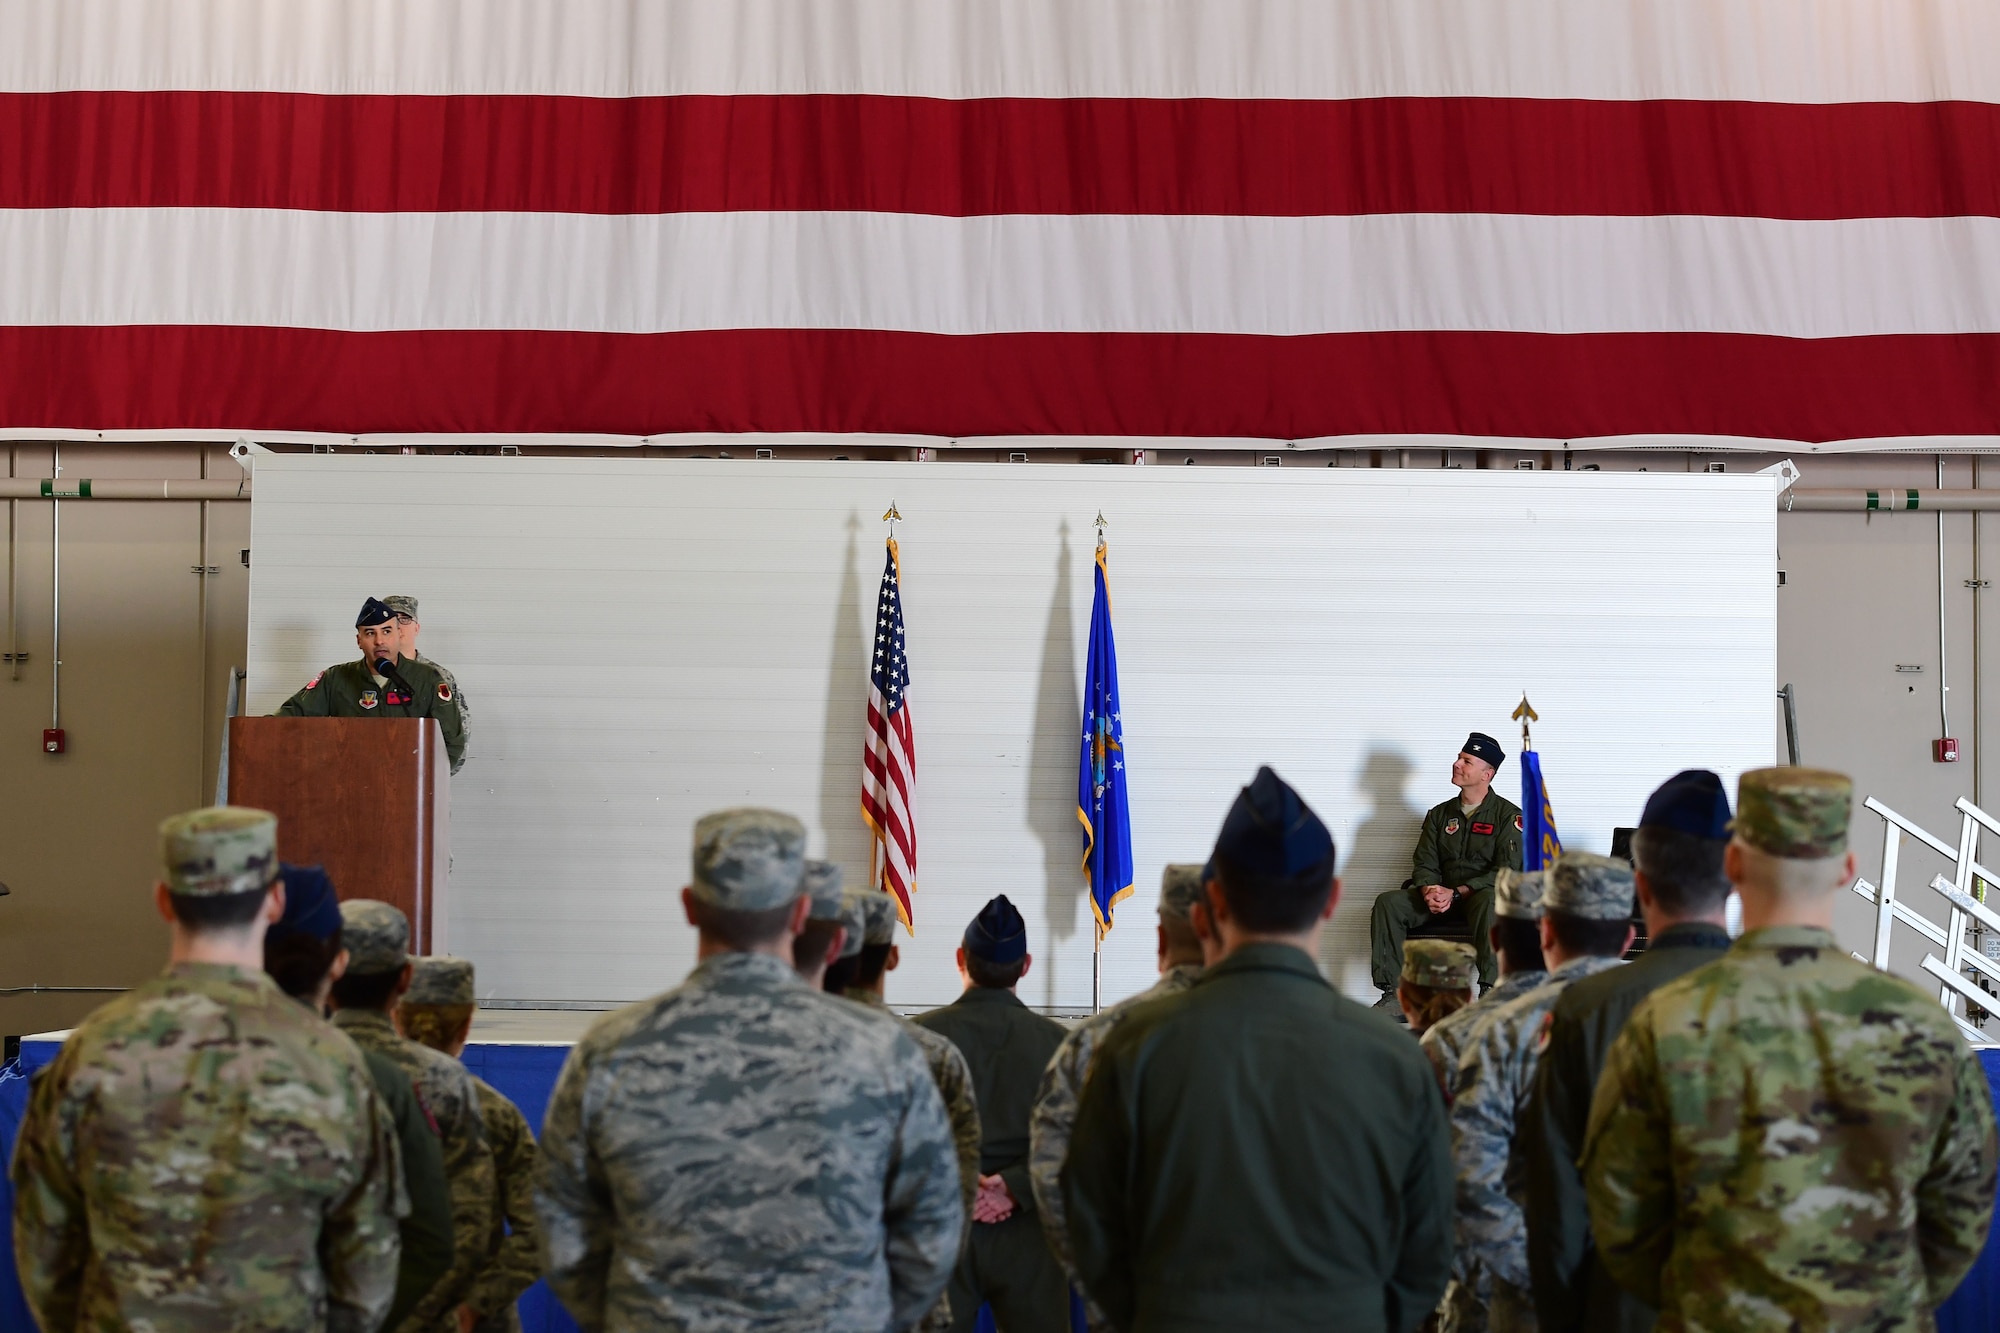 Lt. Col. Hector, 732nd Operations Support Squadron commander, addresses his unit during the 732nd OSS assumption of command at Creech Air Force Base, Nevada, Jan. 23, 2019. The OSS will document the group’s best practices, whether they be combat, intelligence, weather, or infrastructure related; and communicate them appropriately throughout the Remotely Piloted Aircraft enterprise to further enable combat effectiveness and resiliency. (U.S. Air Force photo by Senior Airman Christian Clausen)